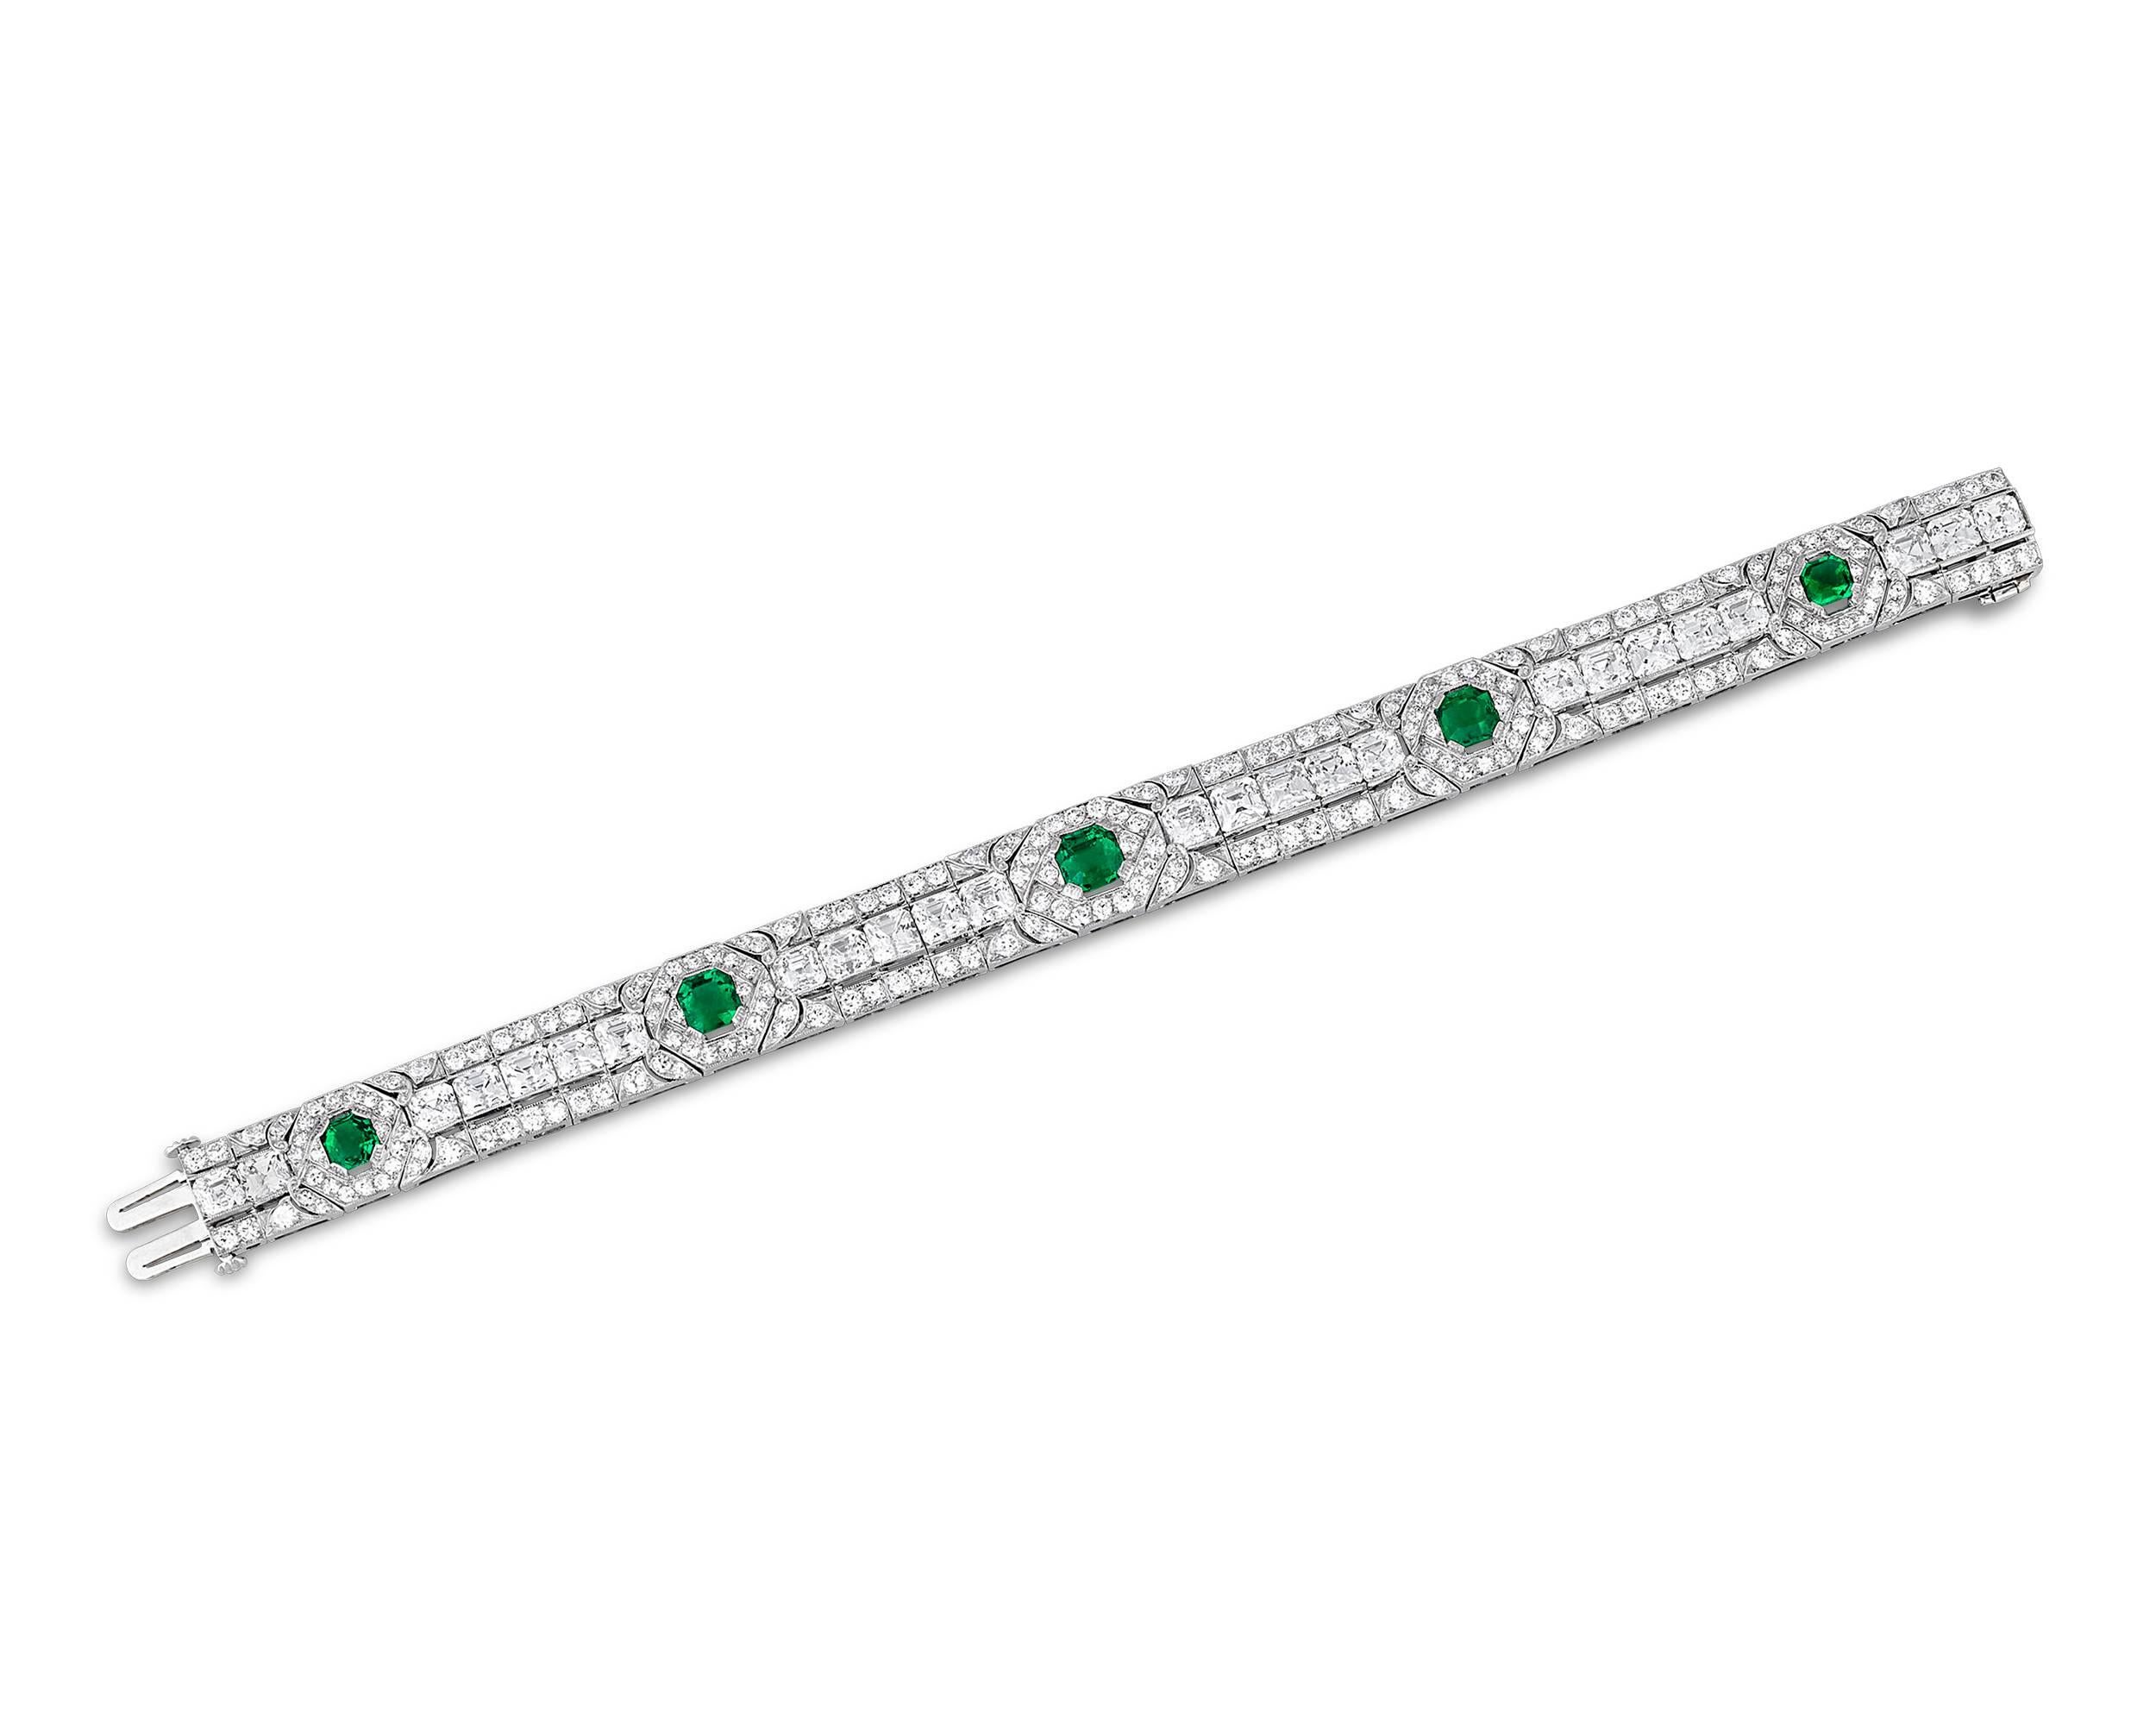 Five breathtaking, classic Colombian emeralds are showcased in this amazing Art Deco-era jeweled masterpiece. Totaling 3.77 carats, these emeralds are certified by the American Gemological Laboratories as untreated and Colombian in origin, meaning